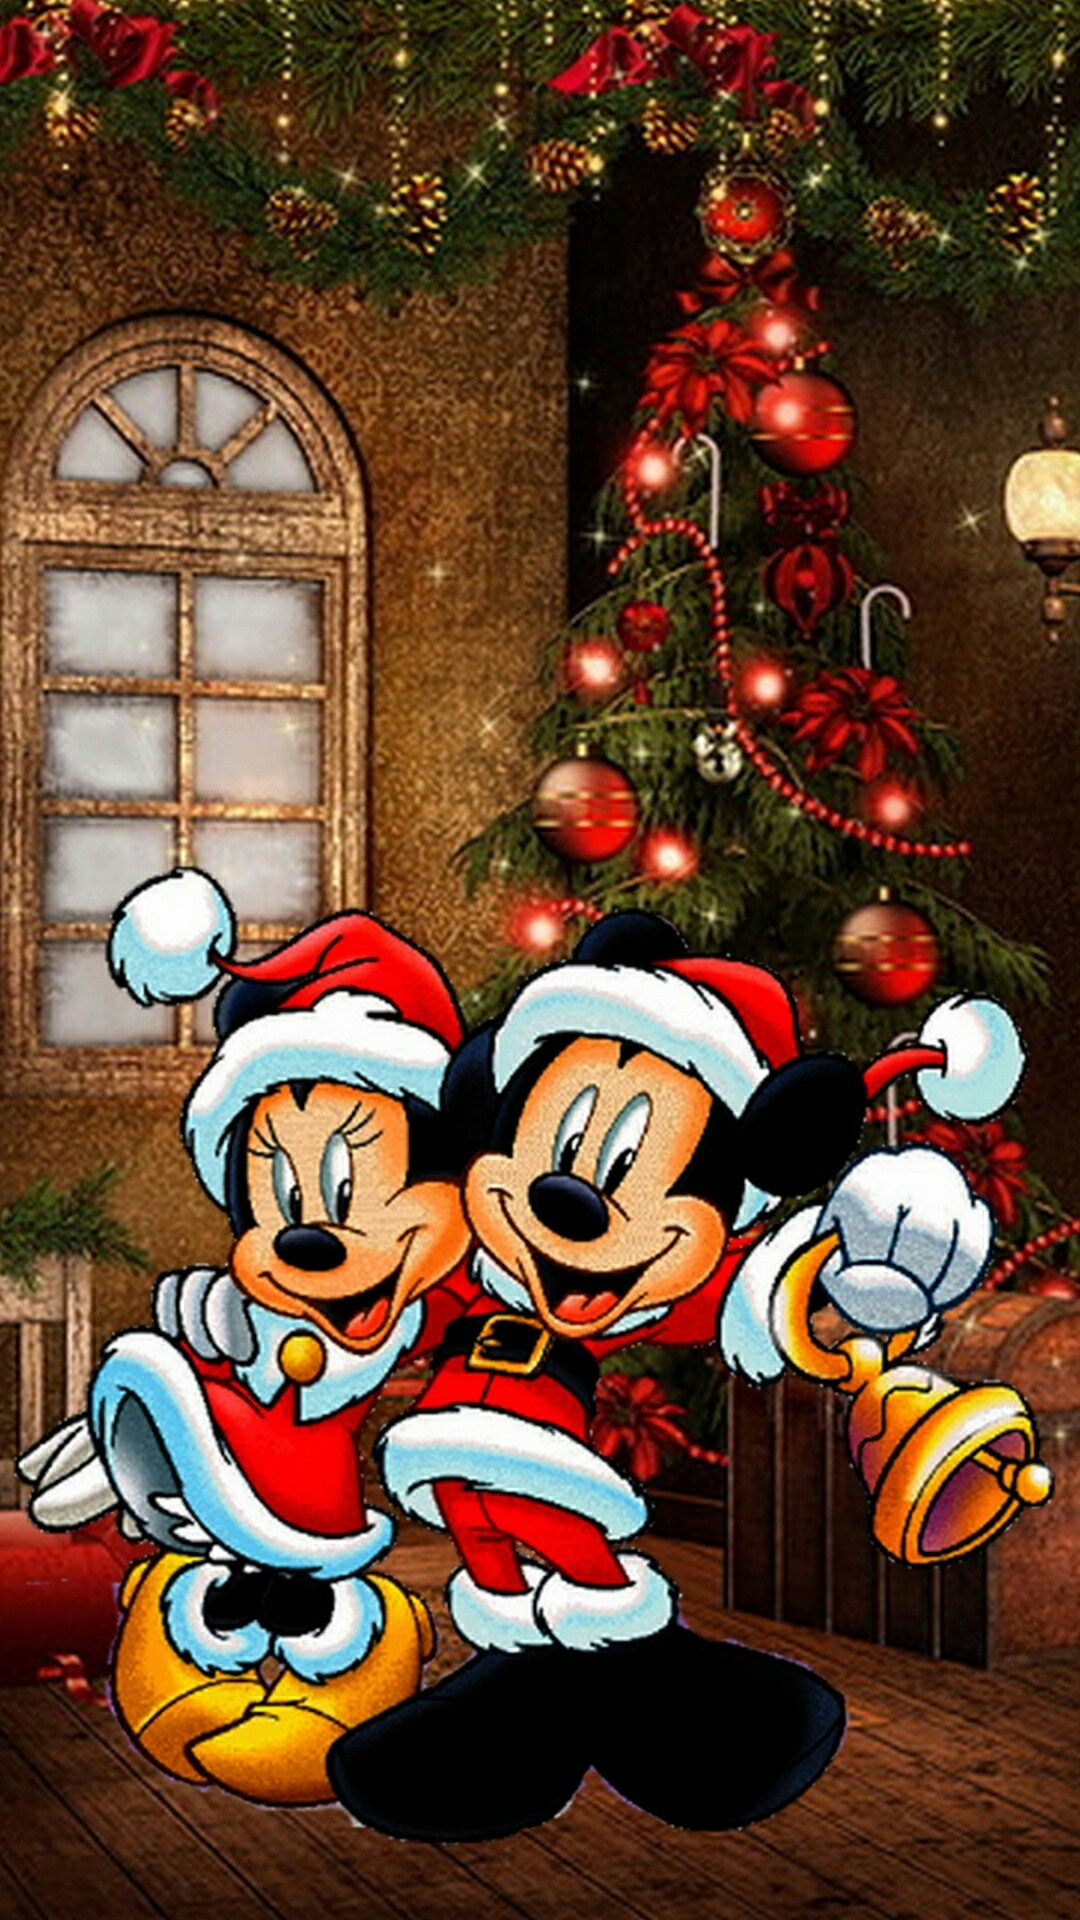 Holiday Wallpaper, Wallpaper Backgrounds, Walt Disney - Mickey Mouse  Christmas Background - 1080x1920 Wallpaper 